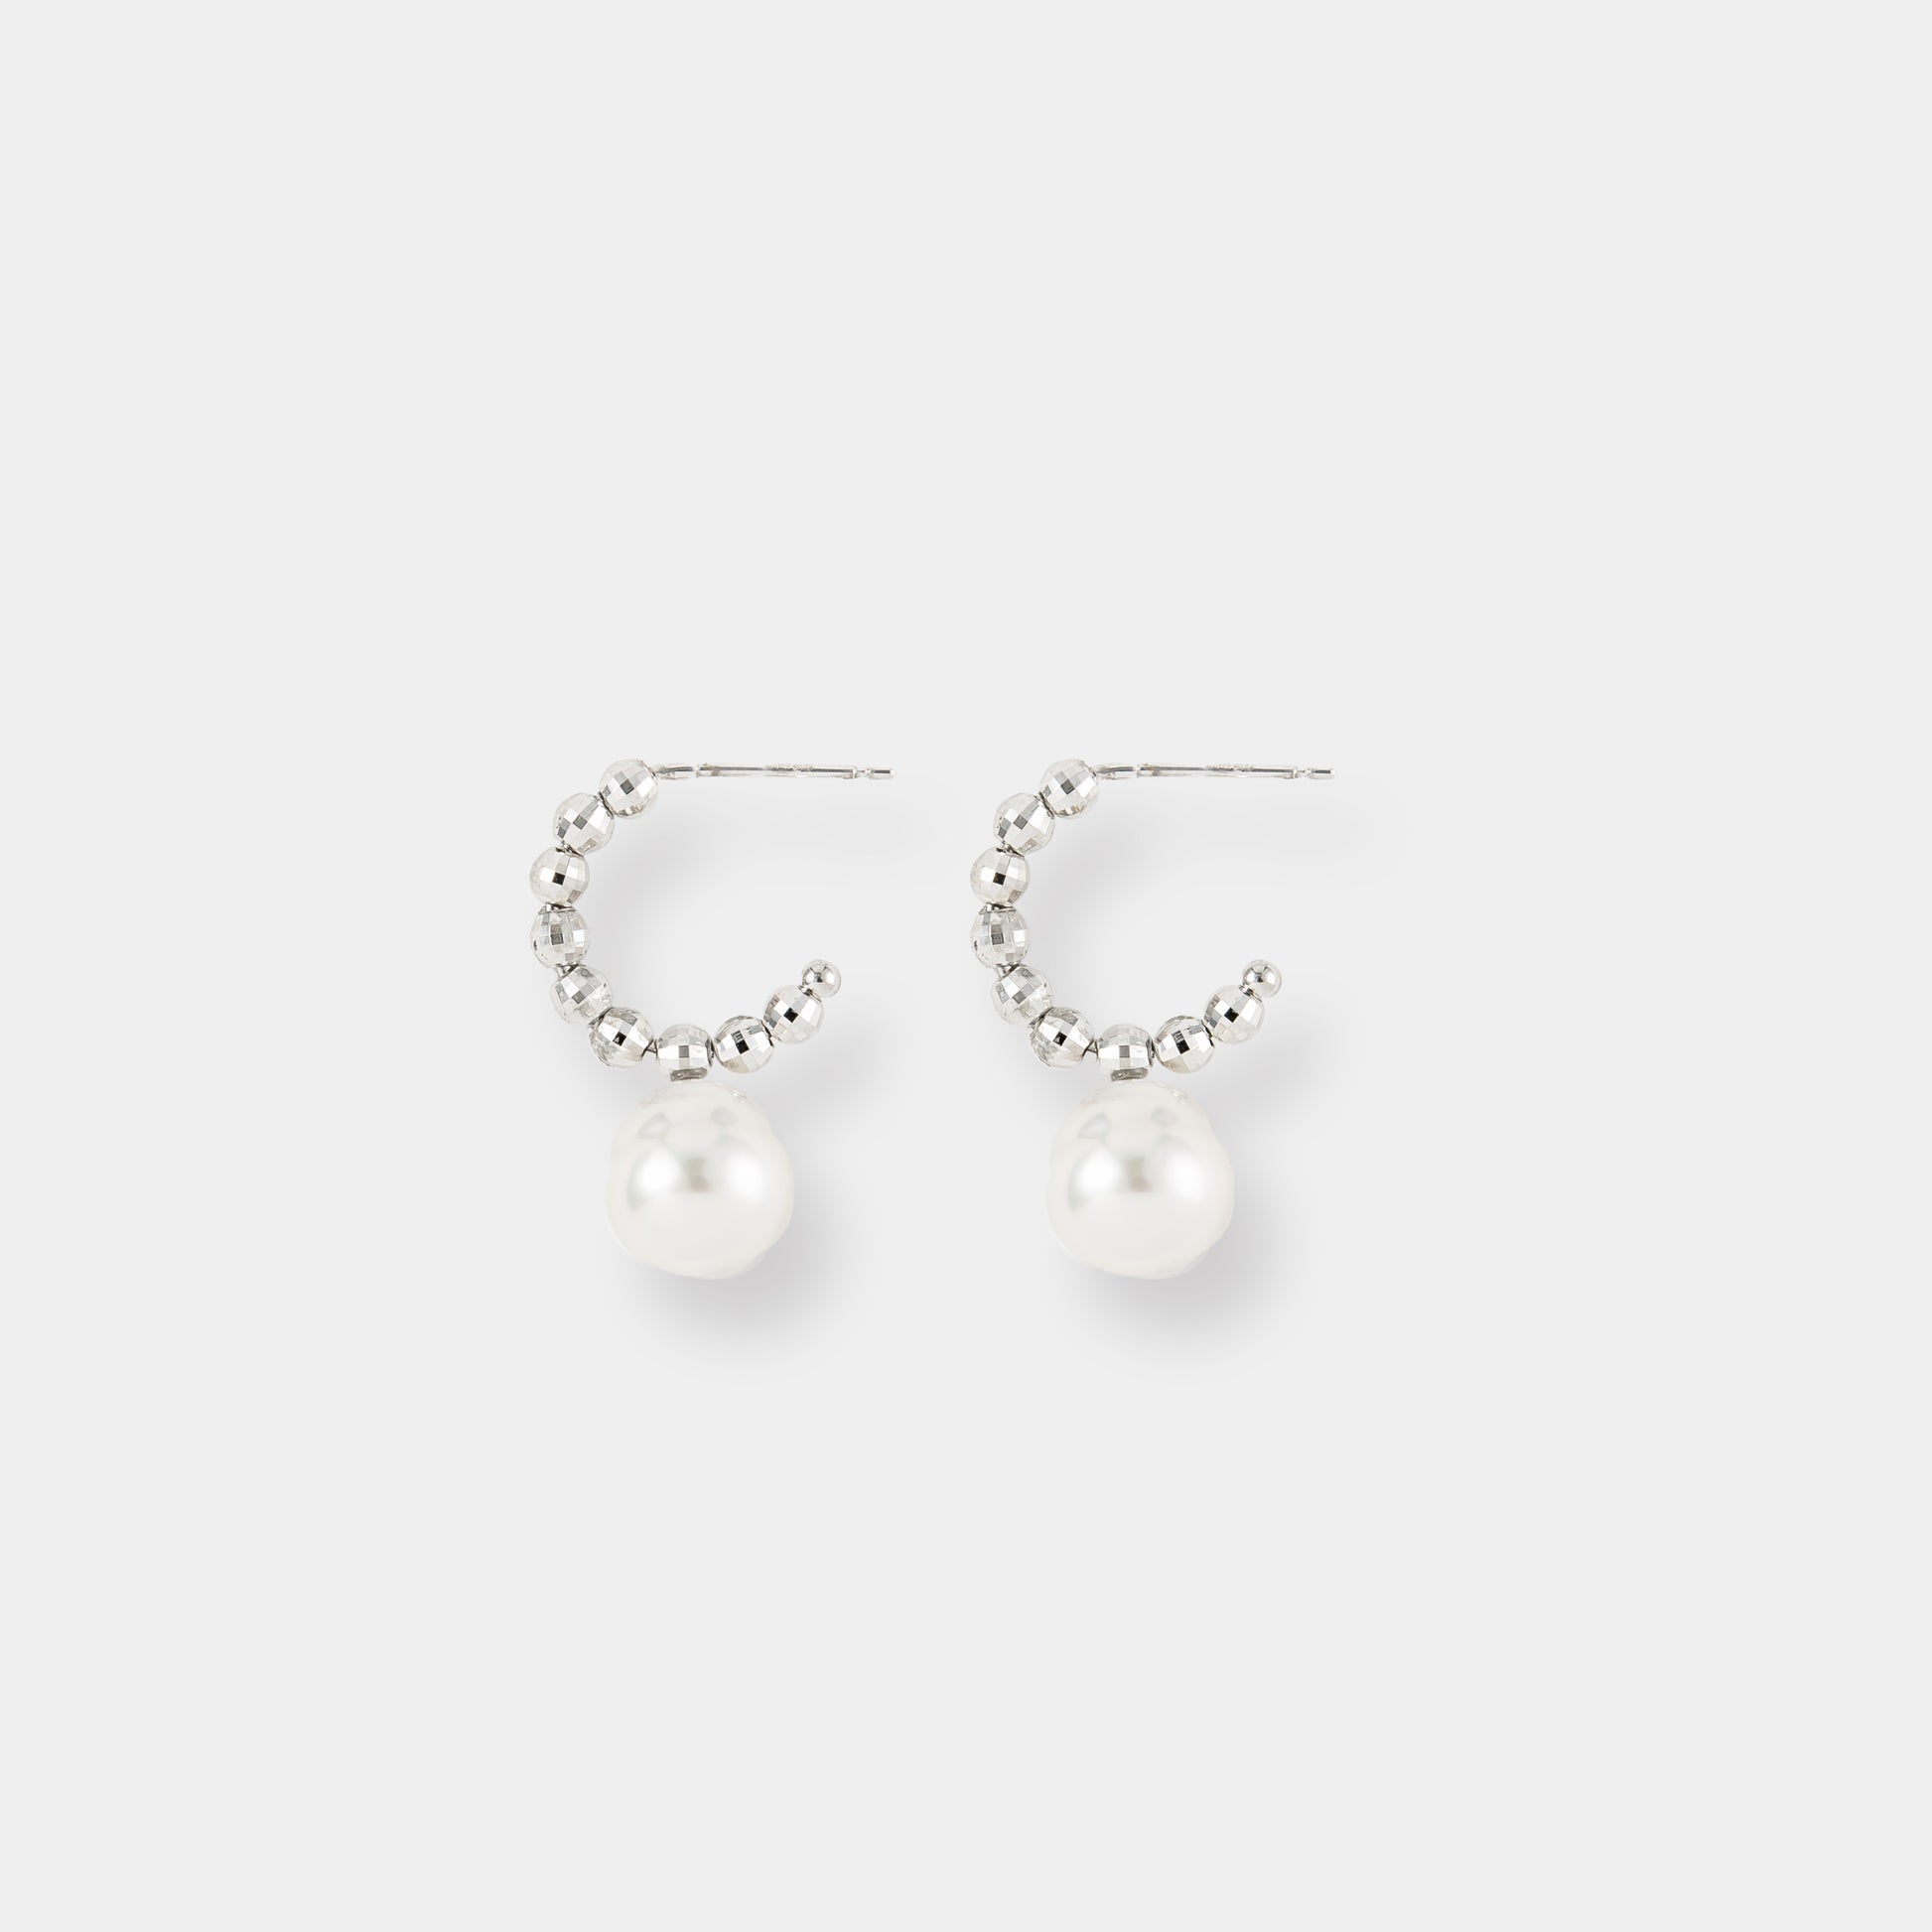 Indulge in timeless beauty with these stunning white pearl and white gold beads earrings. Elevate your style effortlessly.